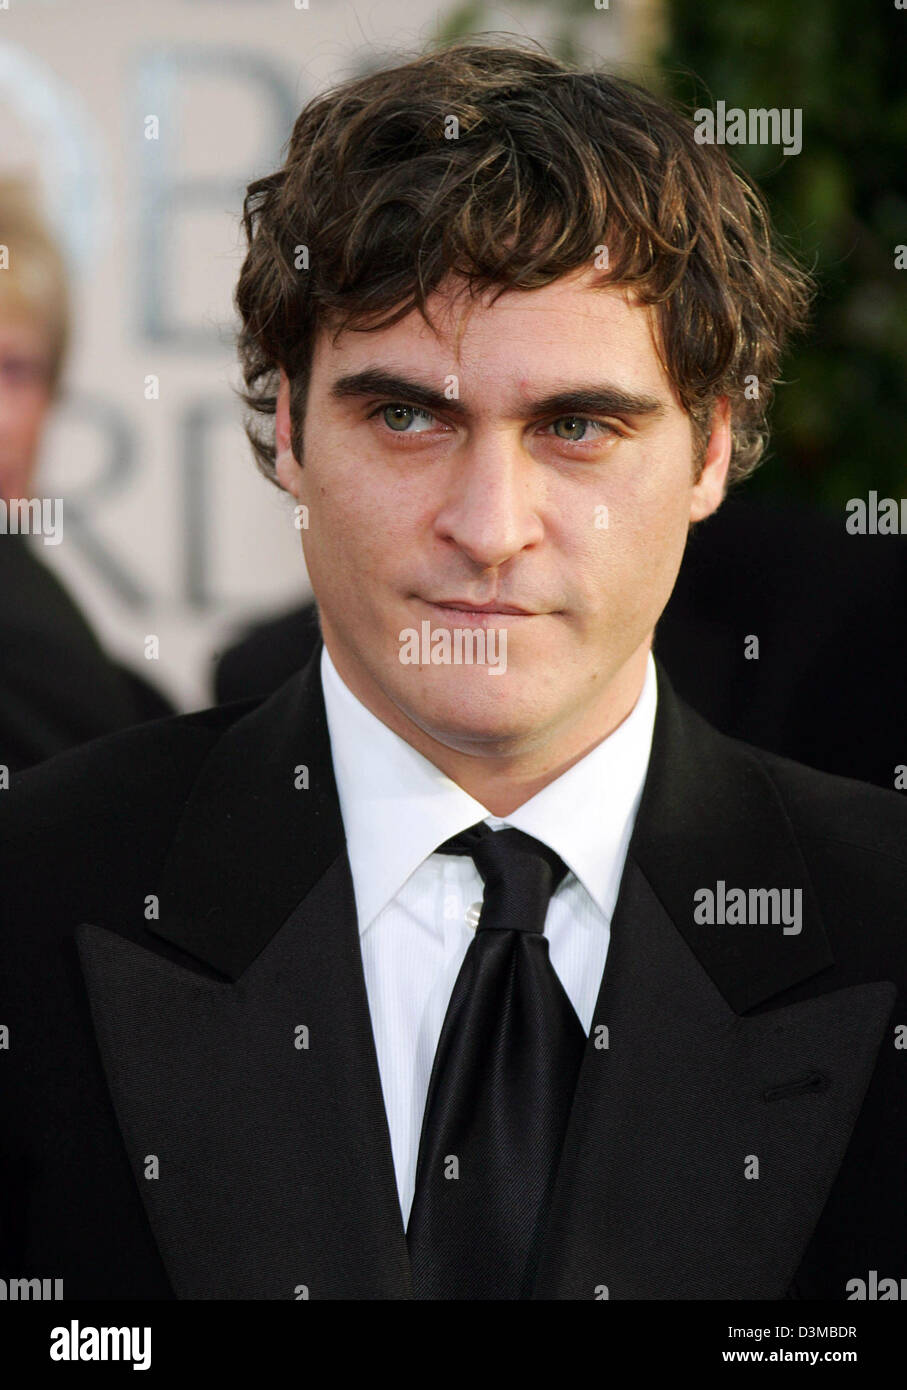 (dpa) - US actor Joaquin Phoenix pictured at the 63rd Annual Golden Globe Awards at the Beverly Hilton Hotel in Los Angeles, USA, 16 January 2006. Photo: Hubert Boesl Stock Photo